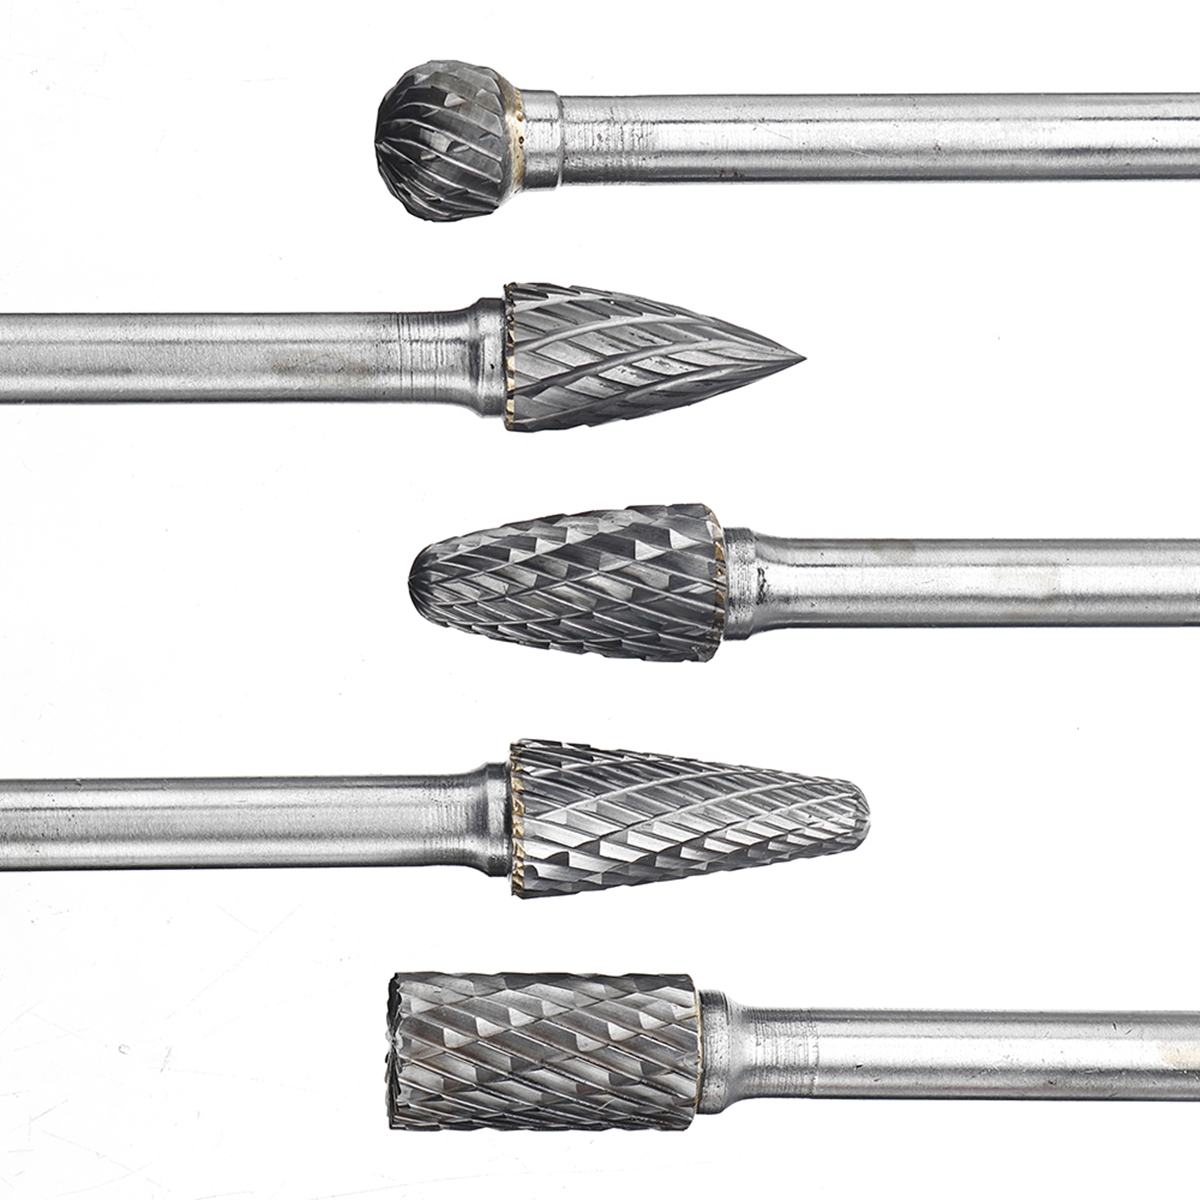 Drillpro-RB29-5pcs-6mm-Shank-Tungsten-Carbide-Burr-Rotary-Cutter-file-Set-Engraving-Tool-1029284-4